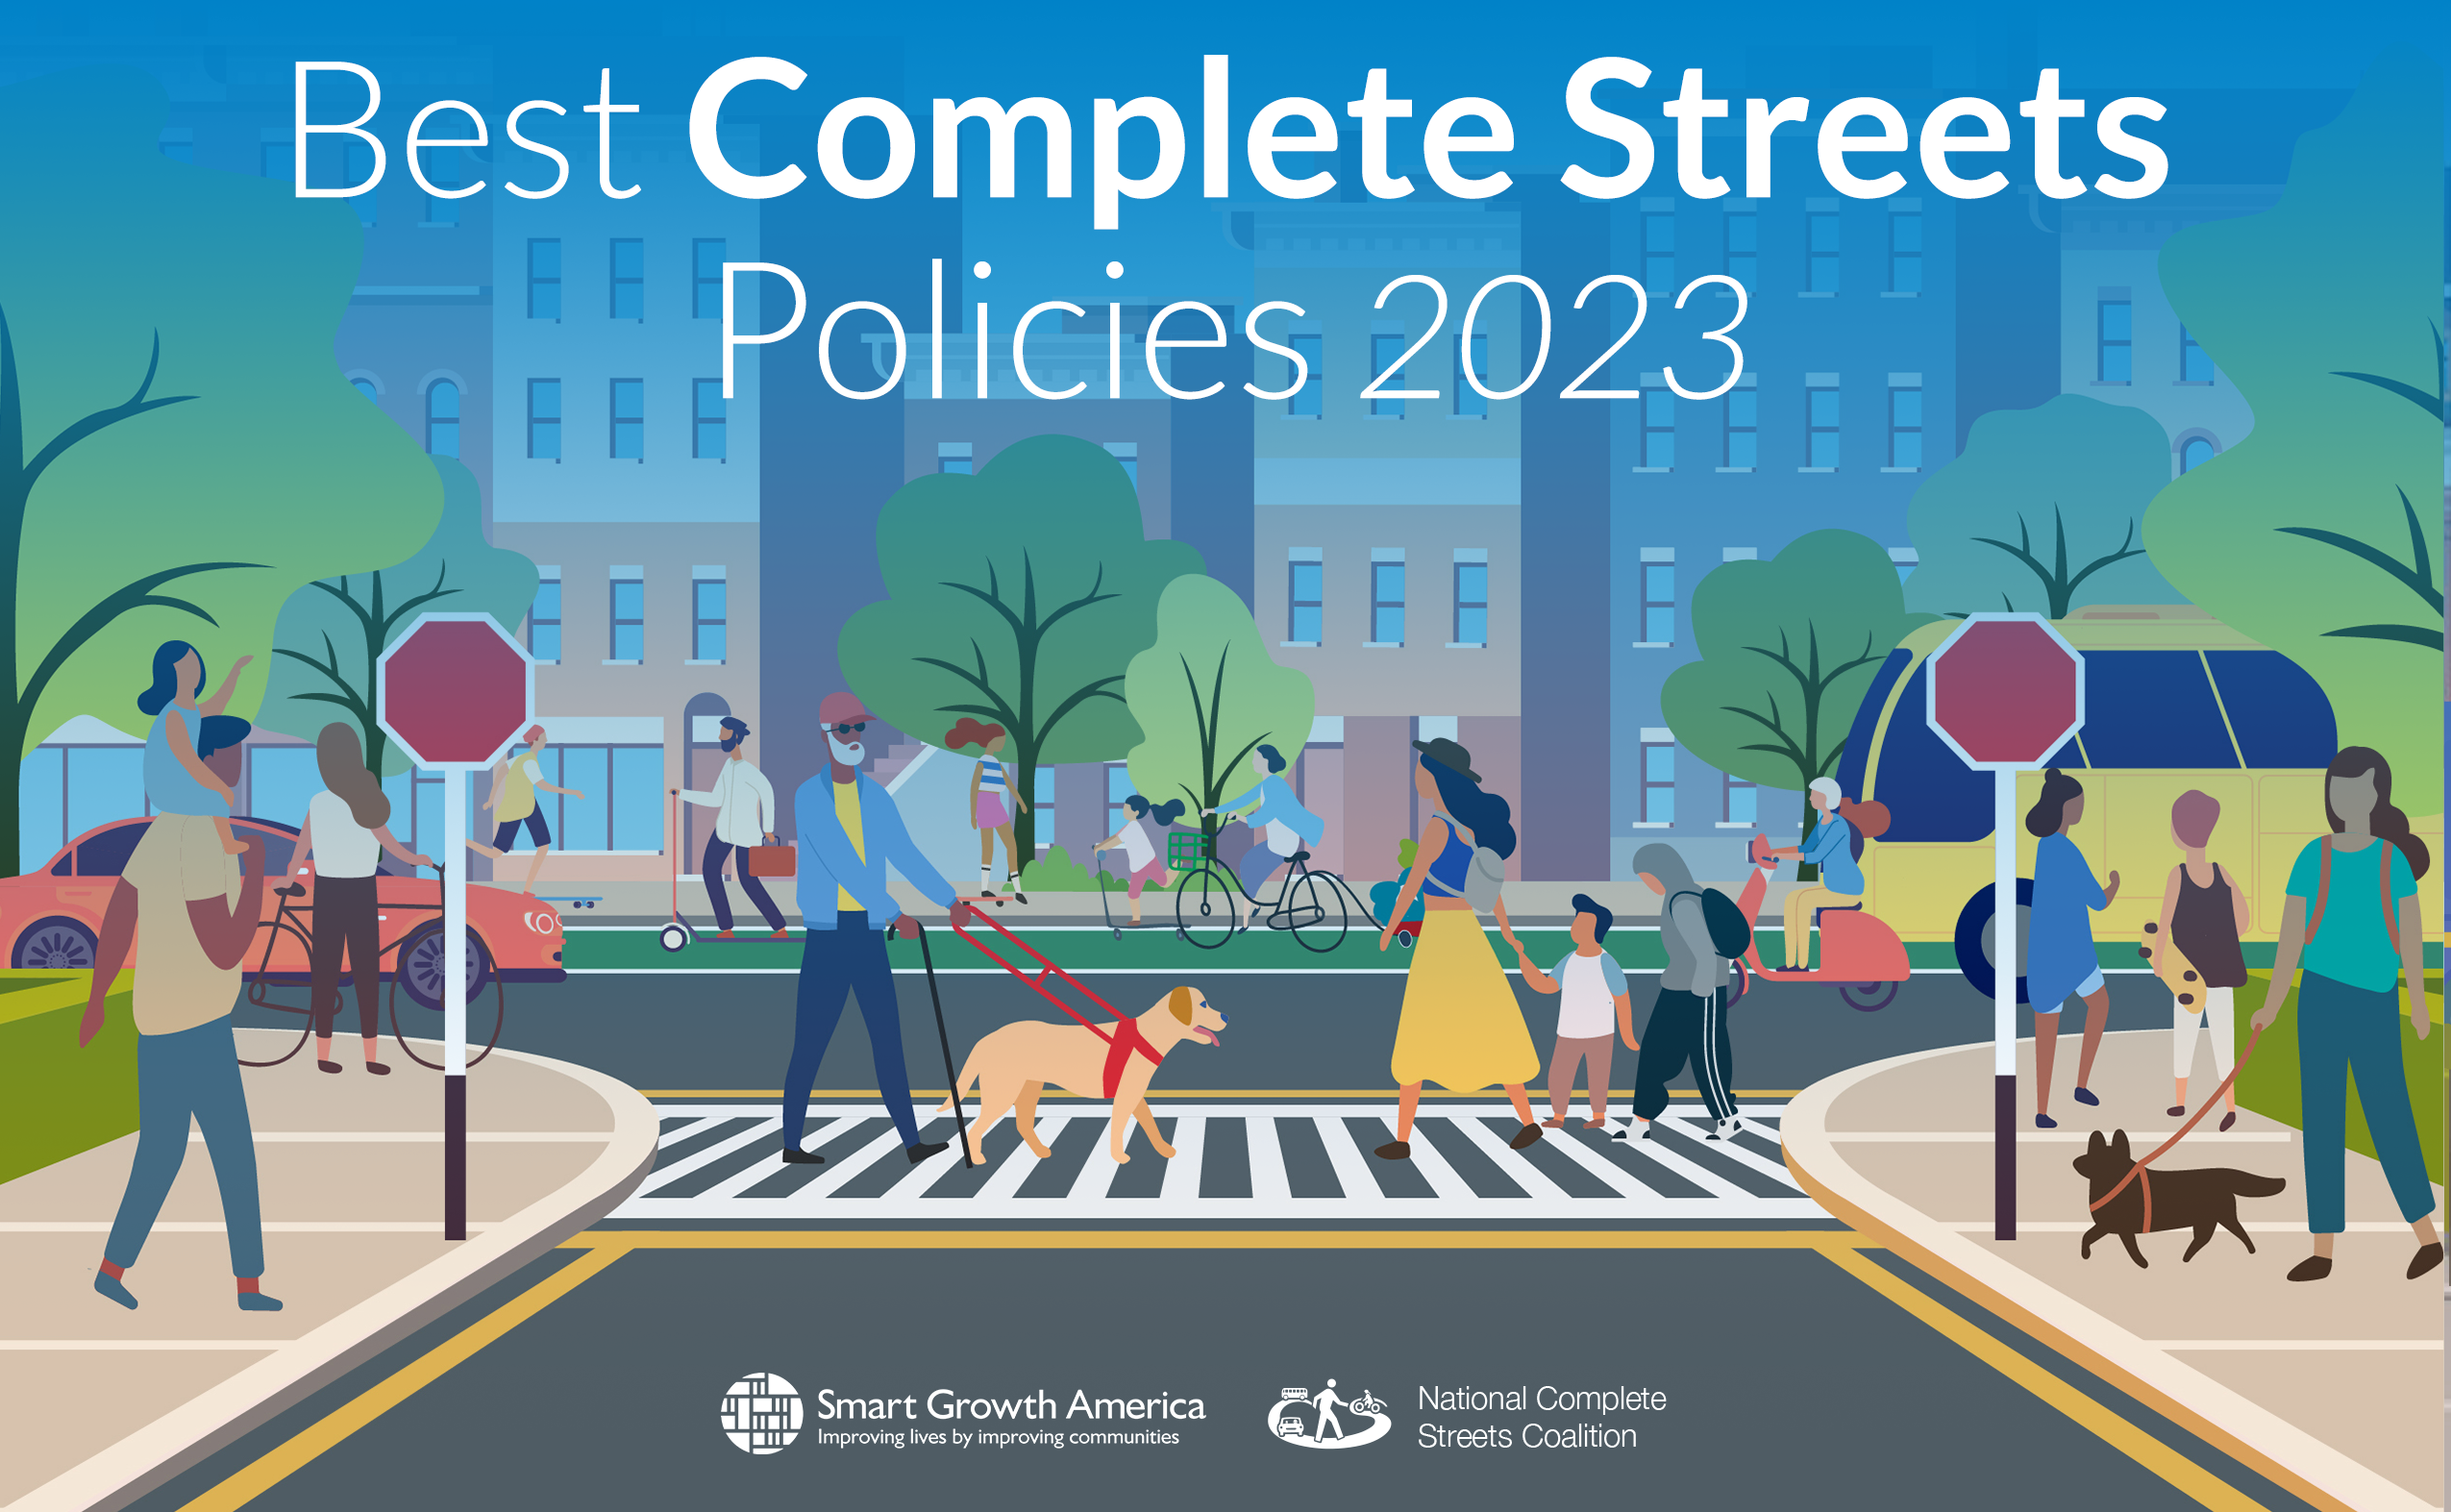 The state of Complete Streets policies, and the need for more progress